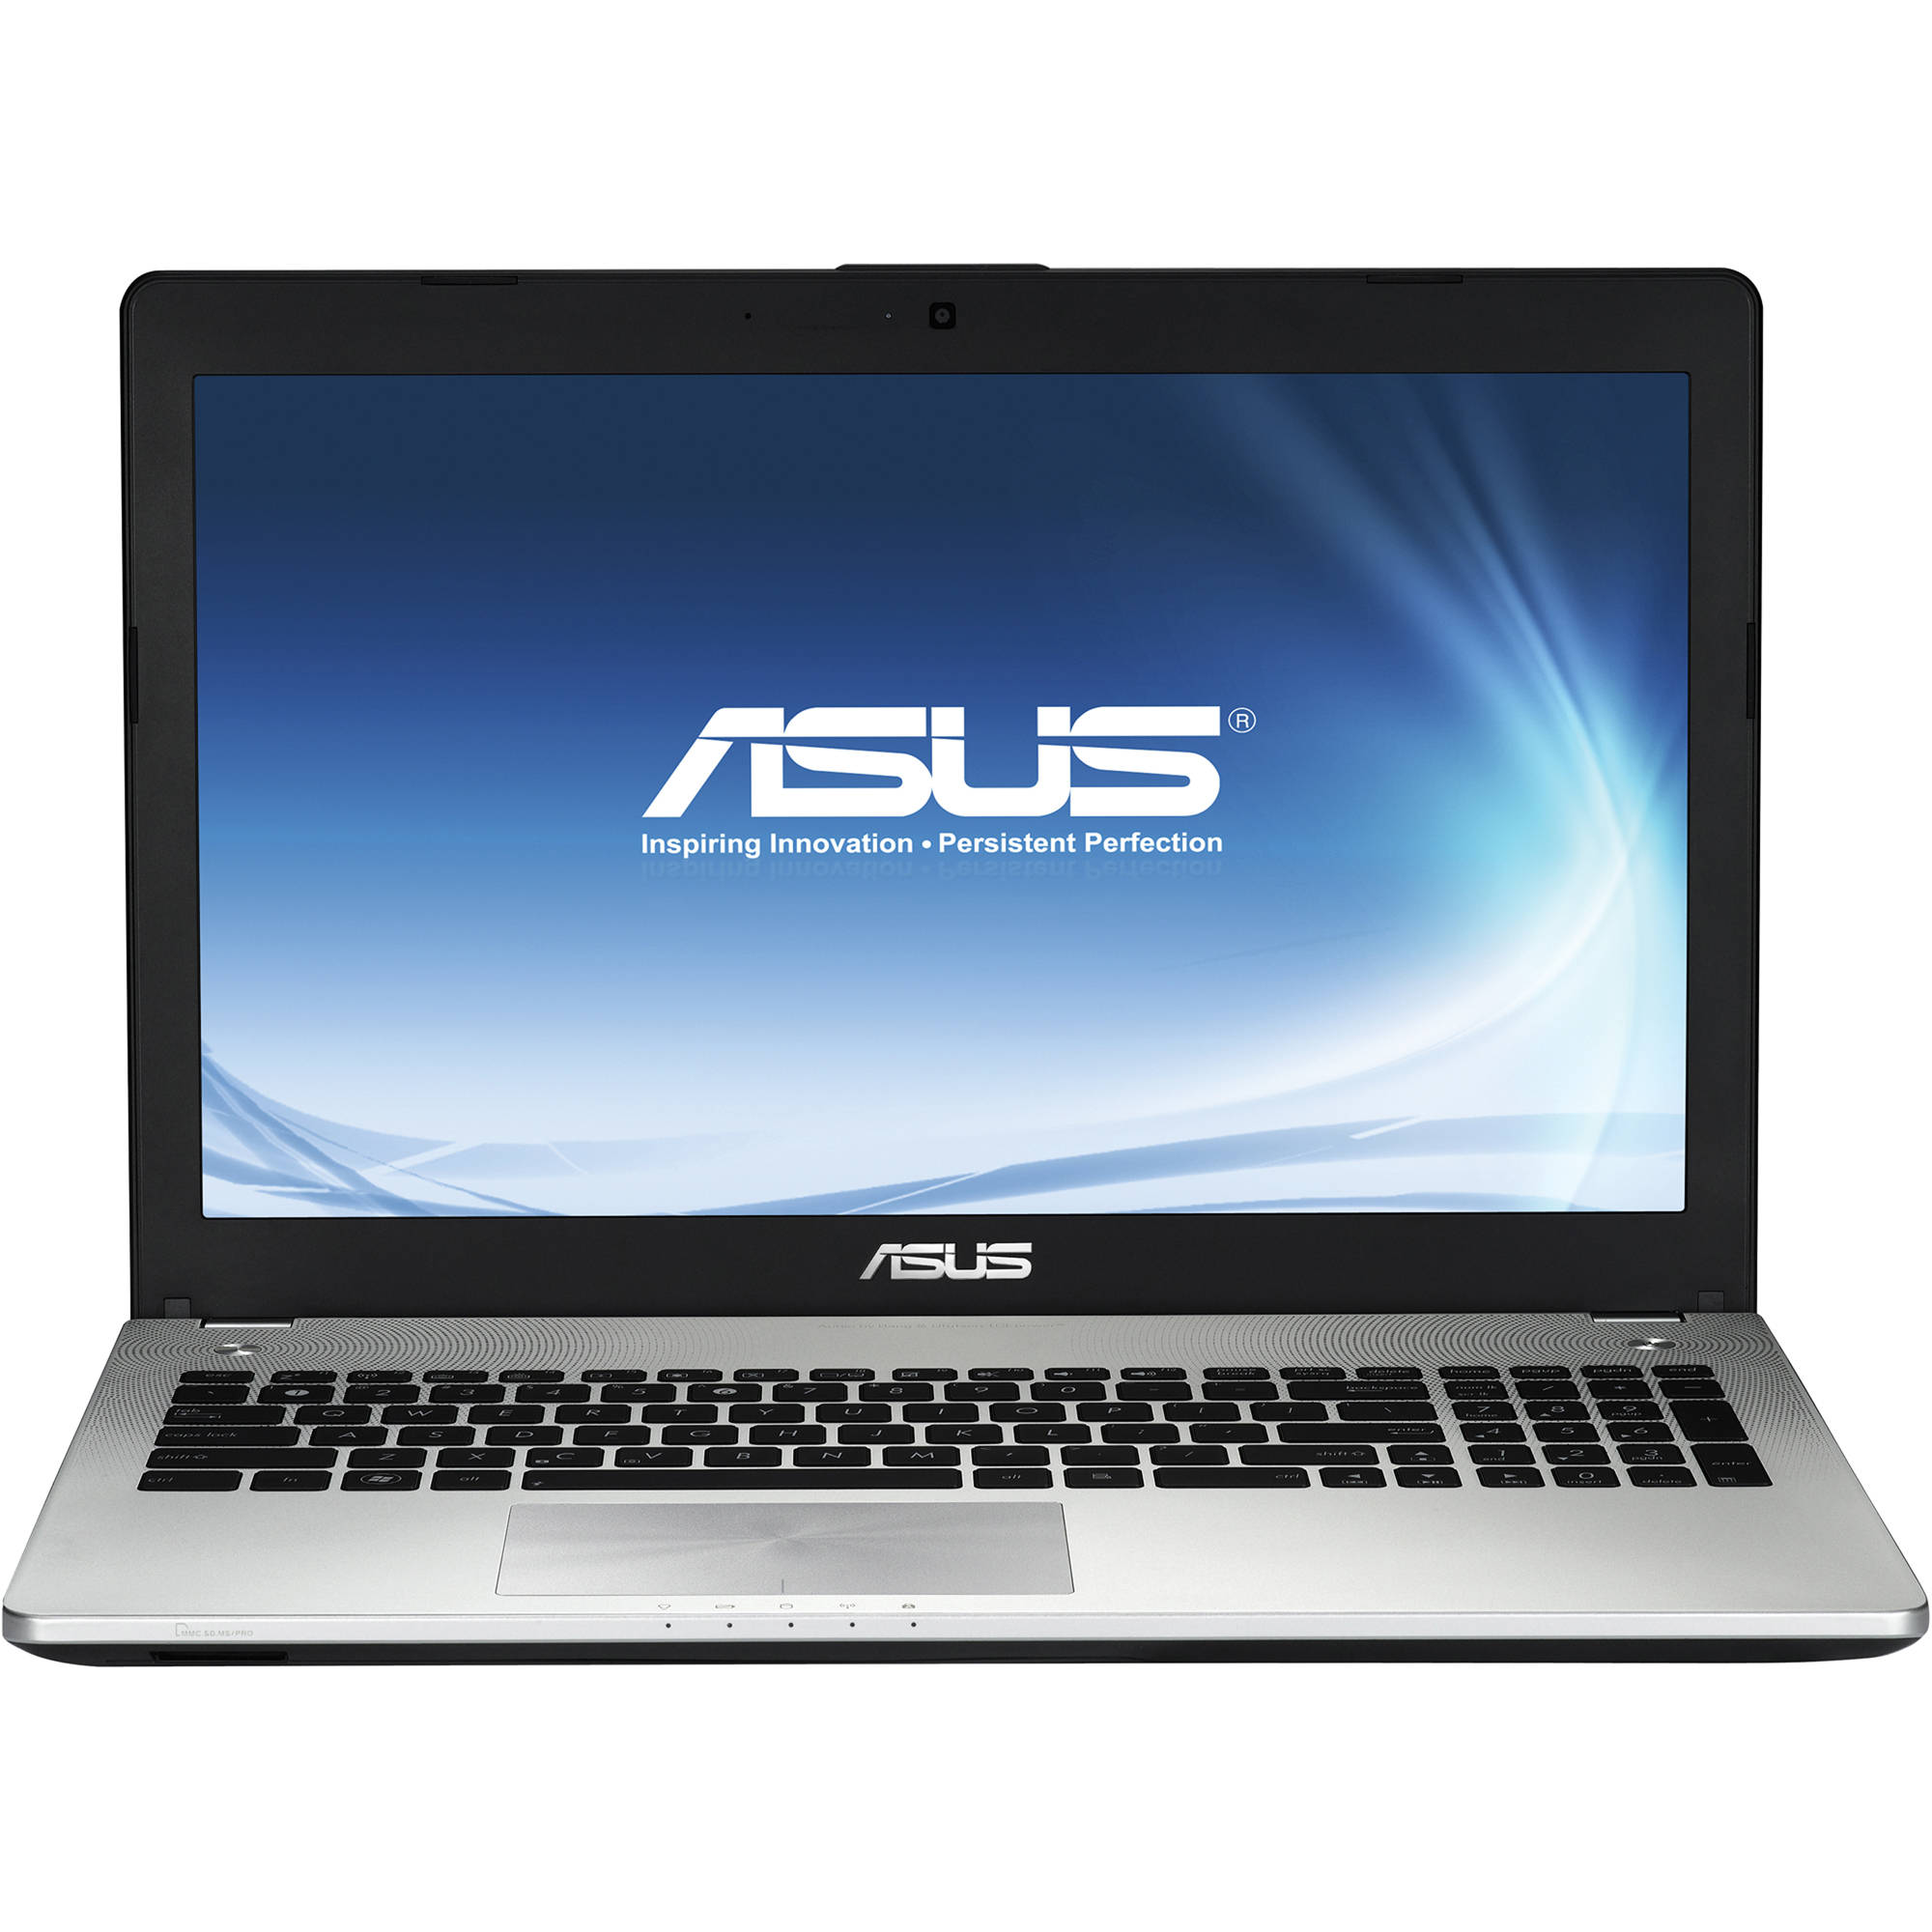 Asus Sonicmaster Subwoofer Driver Windows 10